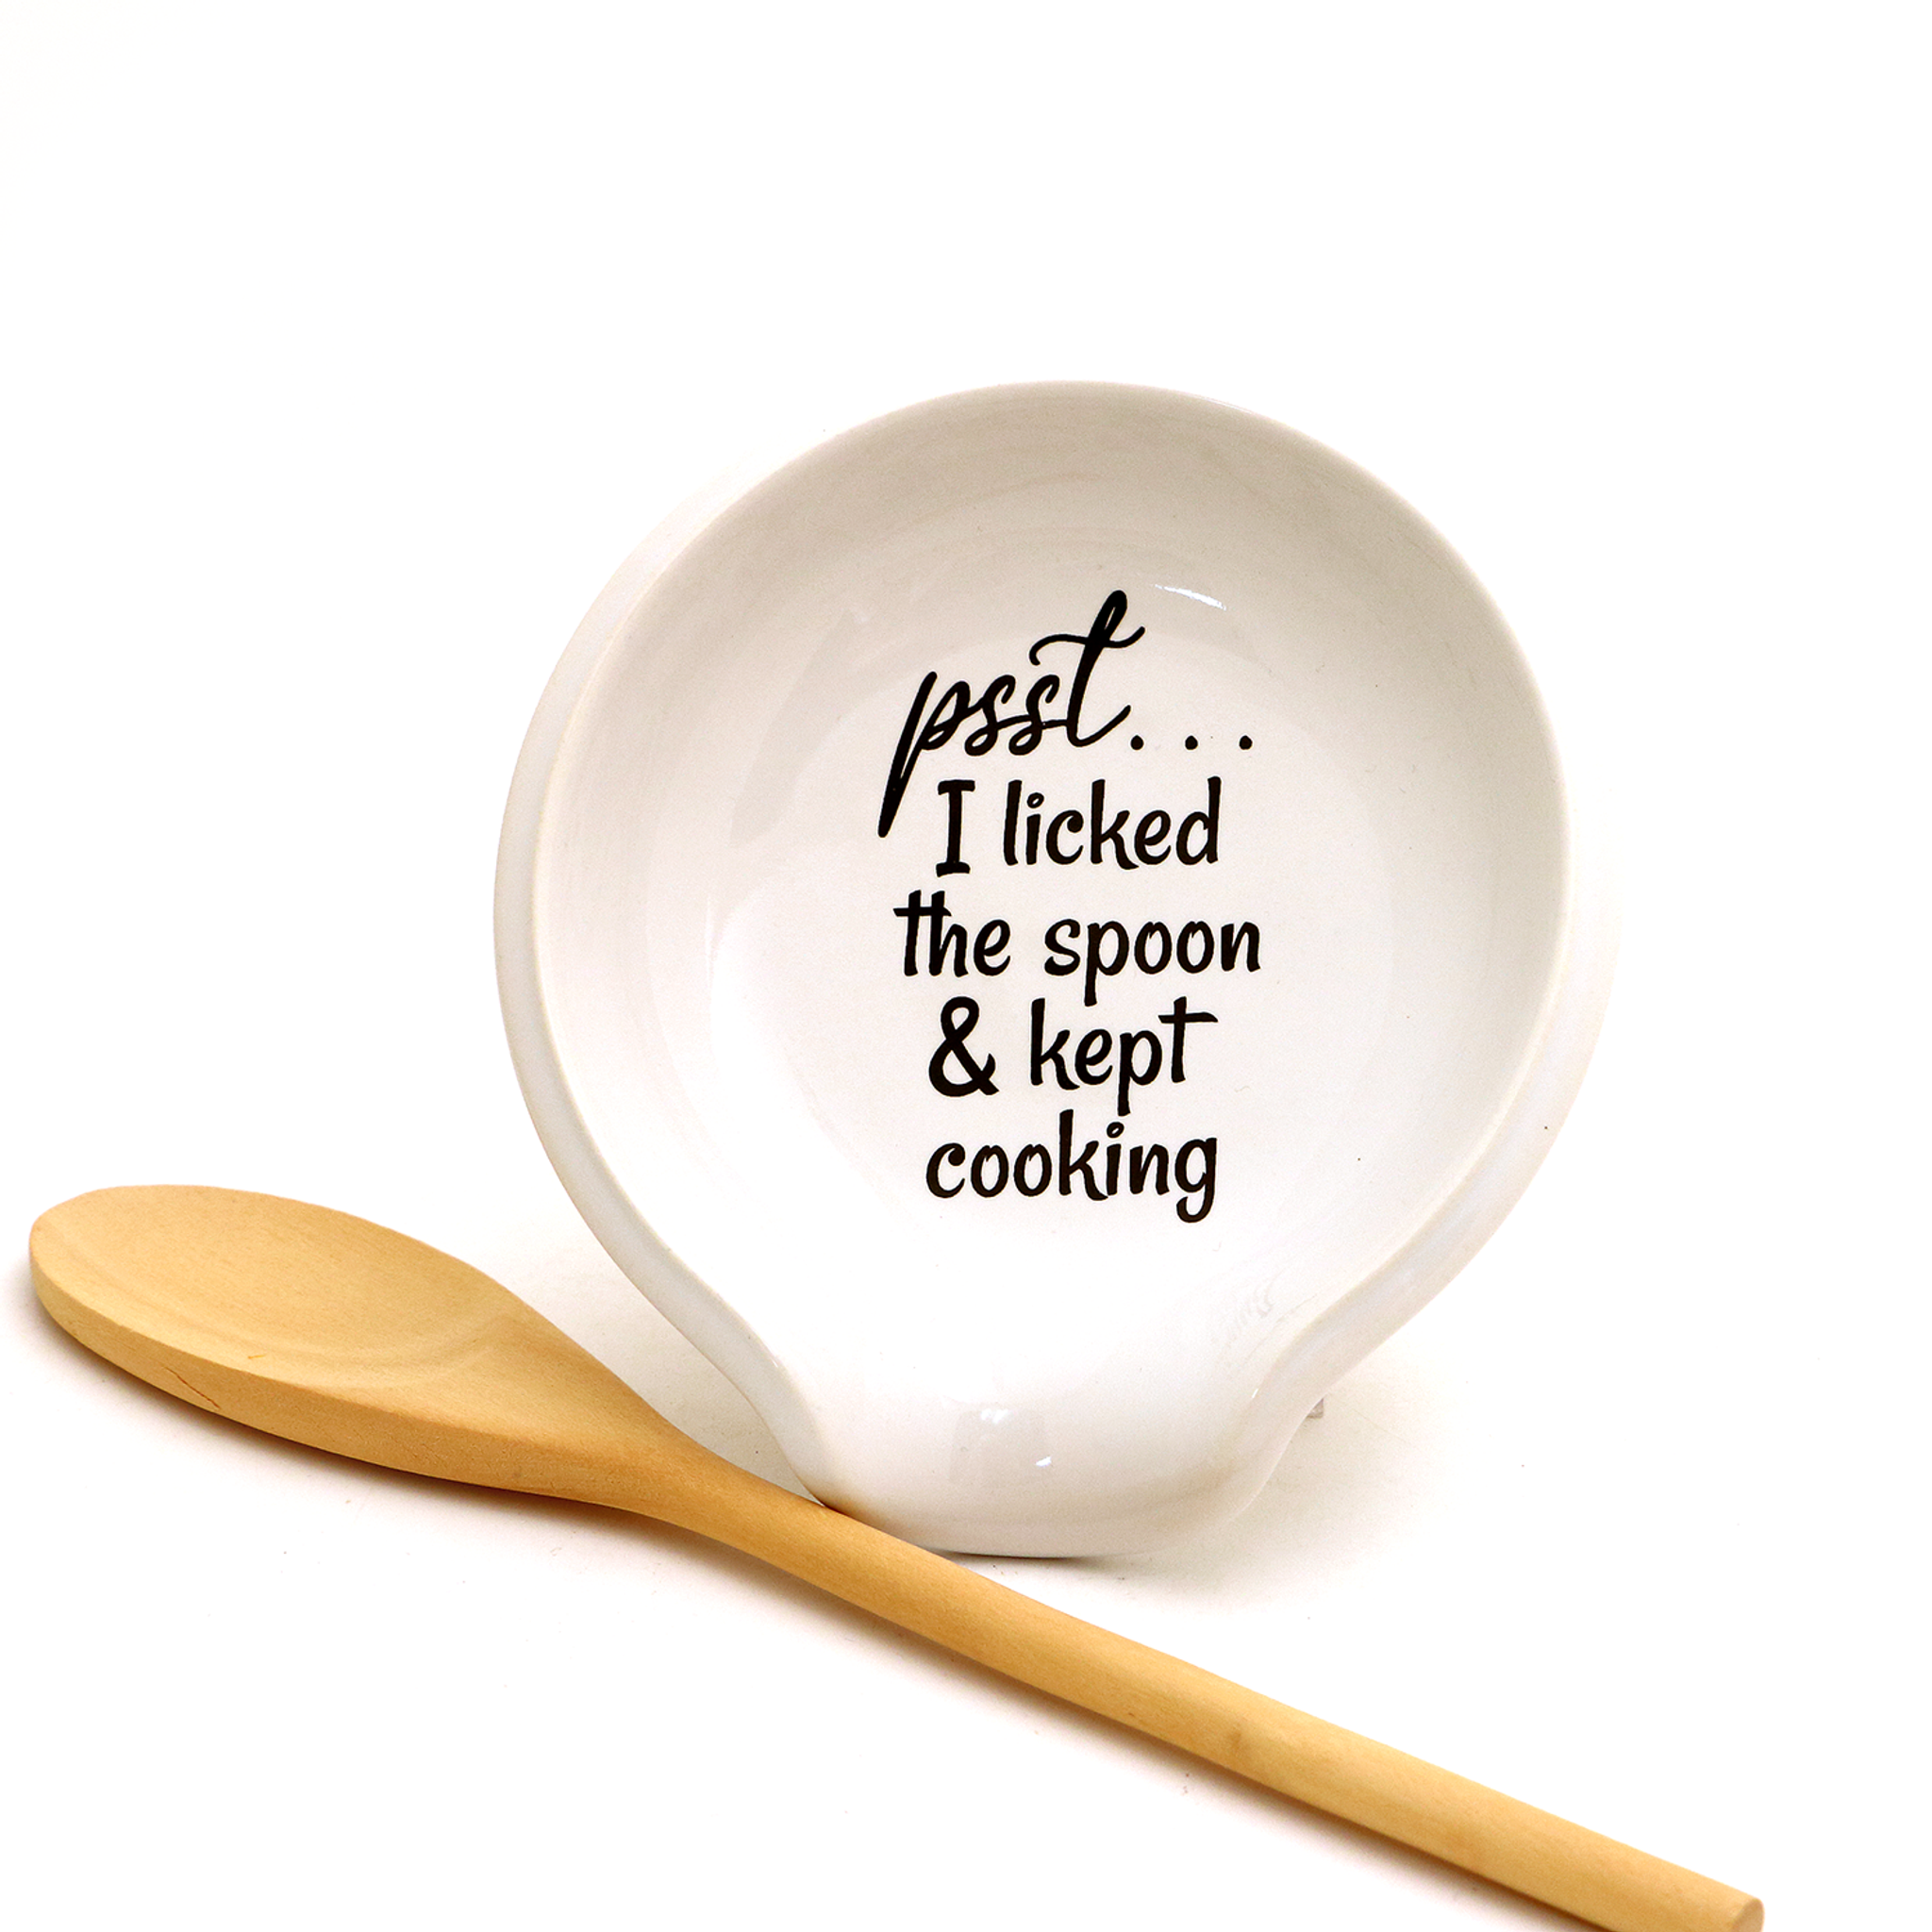 https://cdn11.bigcommerce.com/s-xkfyf2sykm/images/stencil/2048x2048/products/563/4054/licked-the-spoon-spoonrest__53157.1594139184.png?c=2